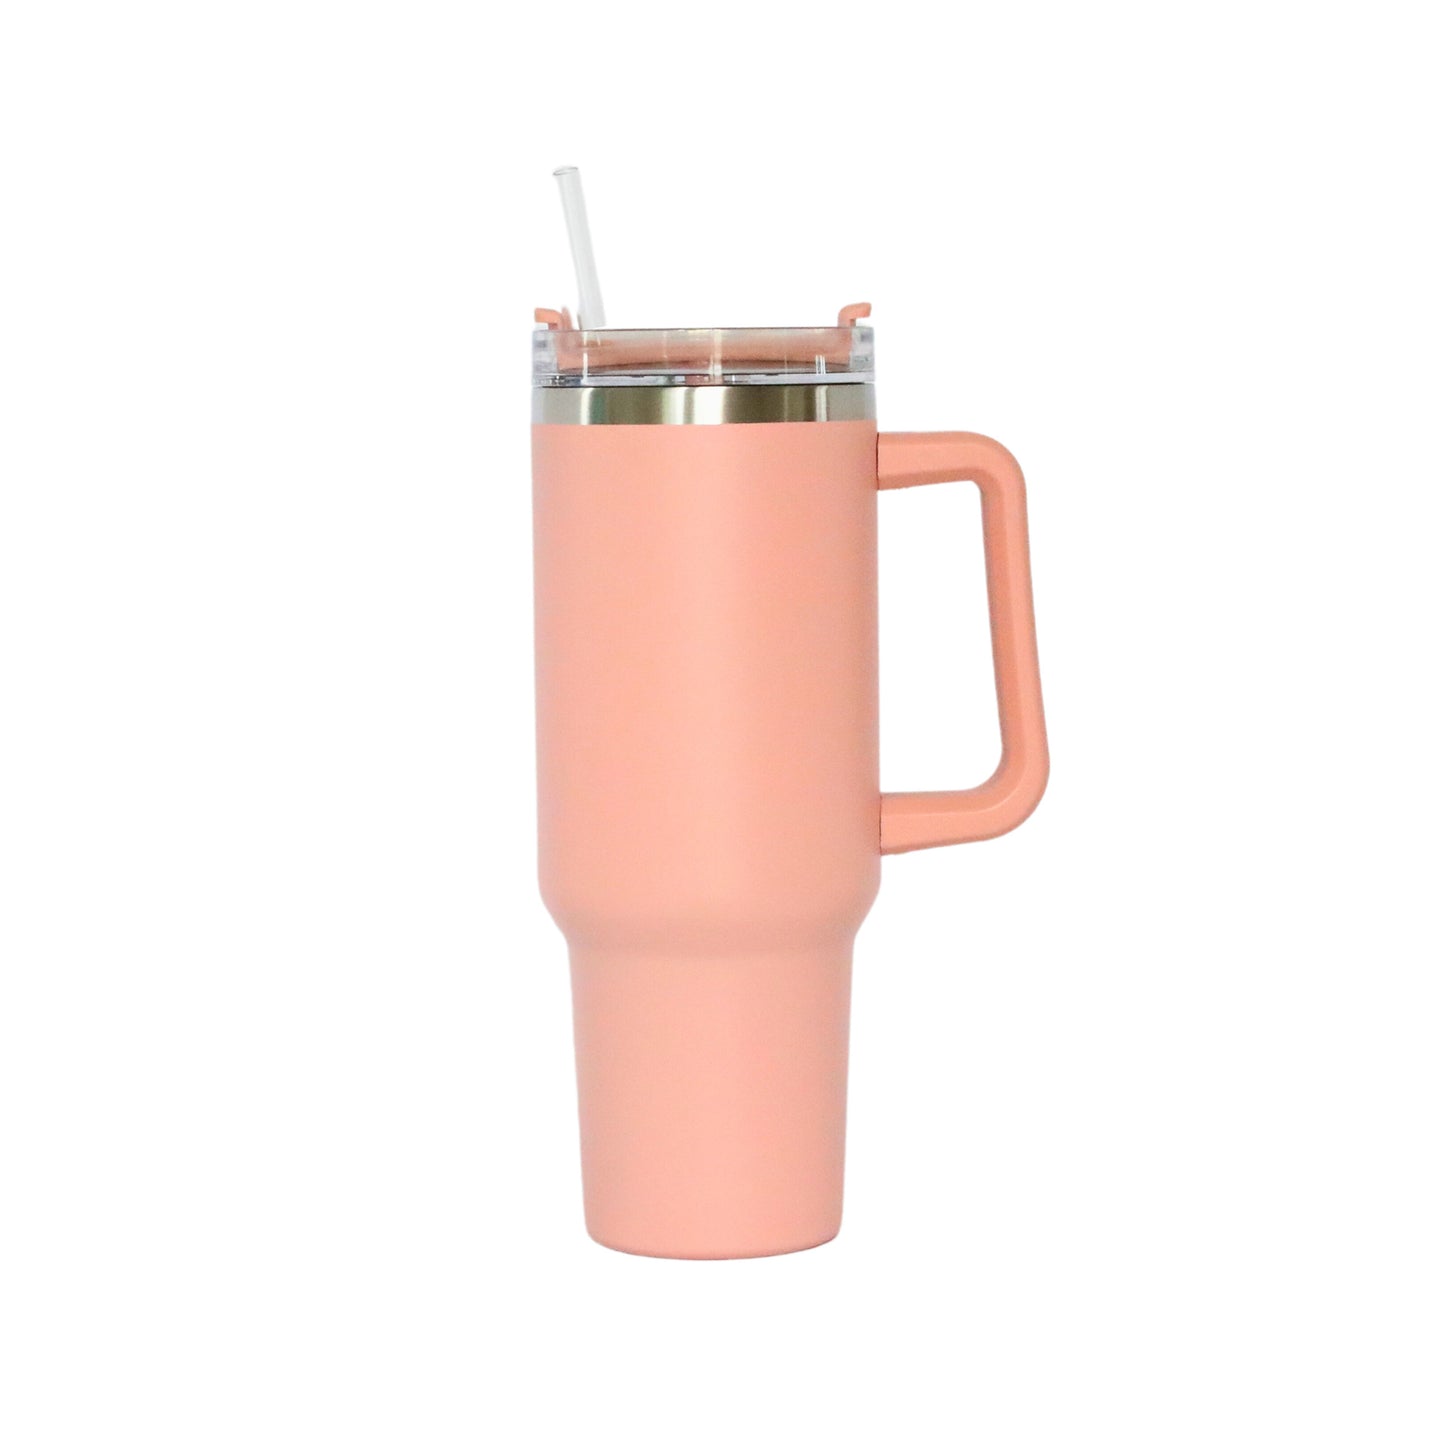 40 Oz Stainless Steel Tumbler with Handle & Straw - Peach